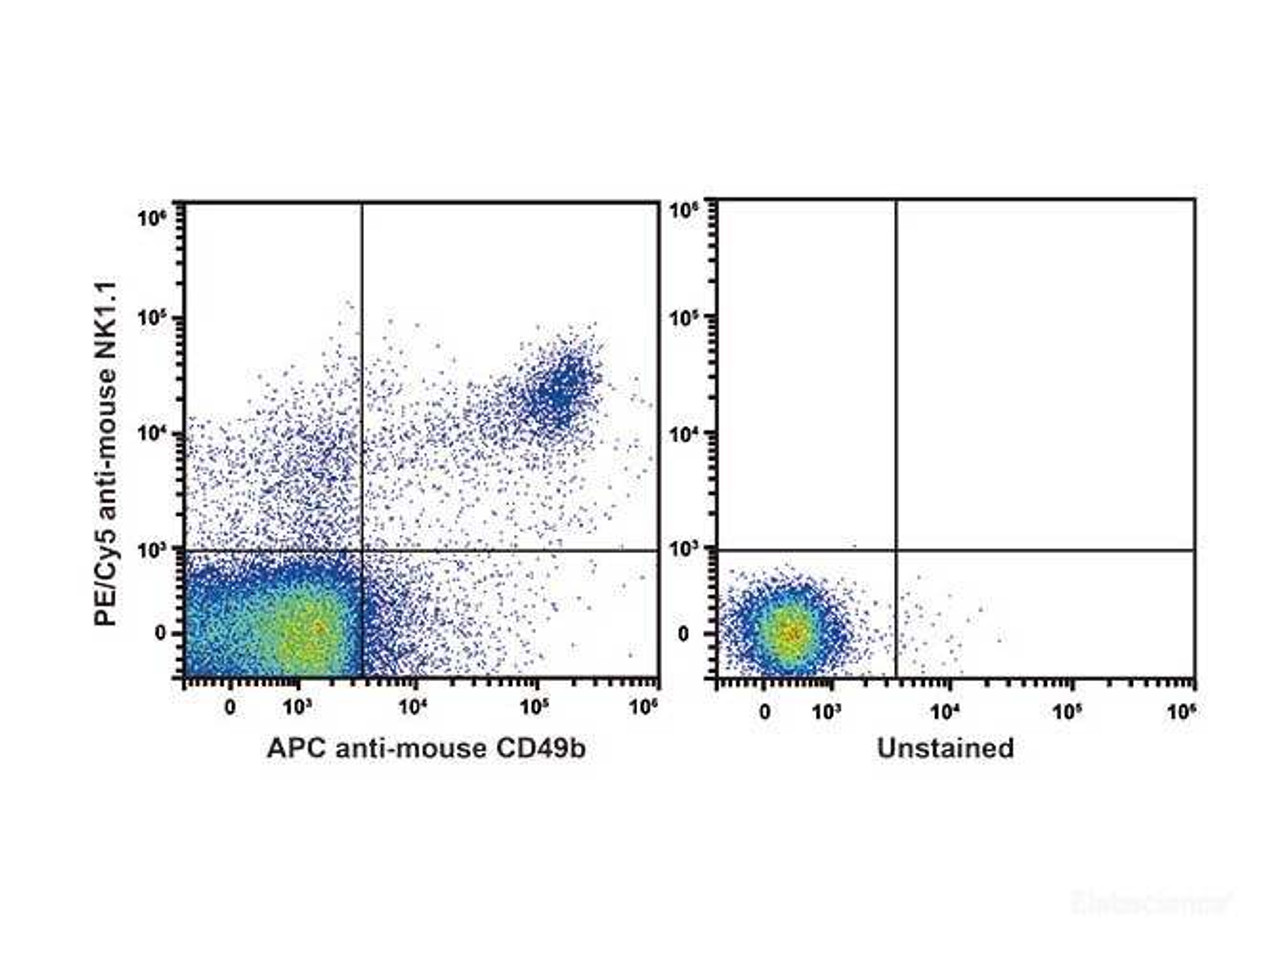 C57BL/6 murine splenocytes are stained with PE/Cyanine5 Anti-Mouse CD161/NK1.1 Antibody and APC Anti-Mouse CD49b Antibody(Left). Unstained splenocytes are used as control(Right).